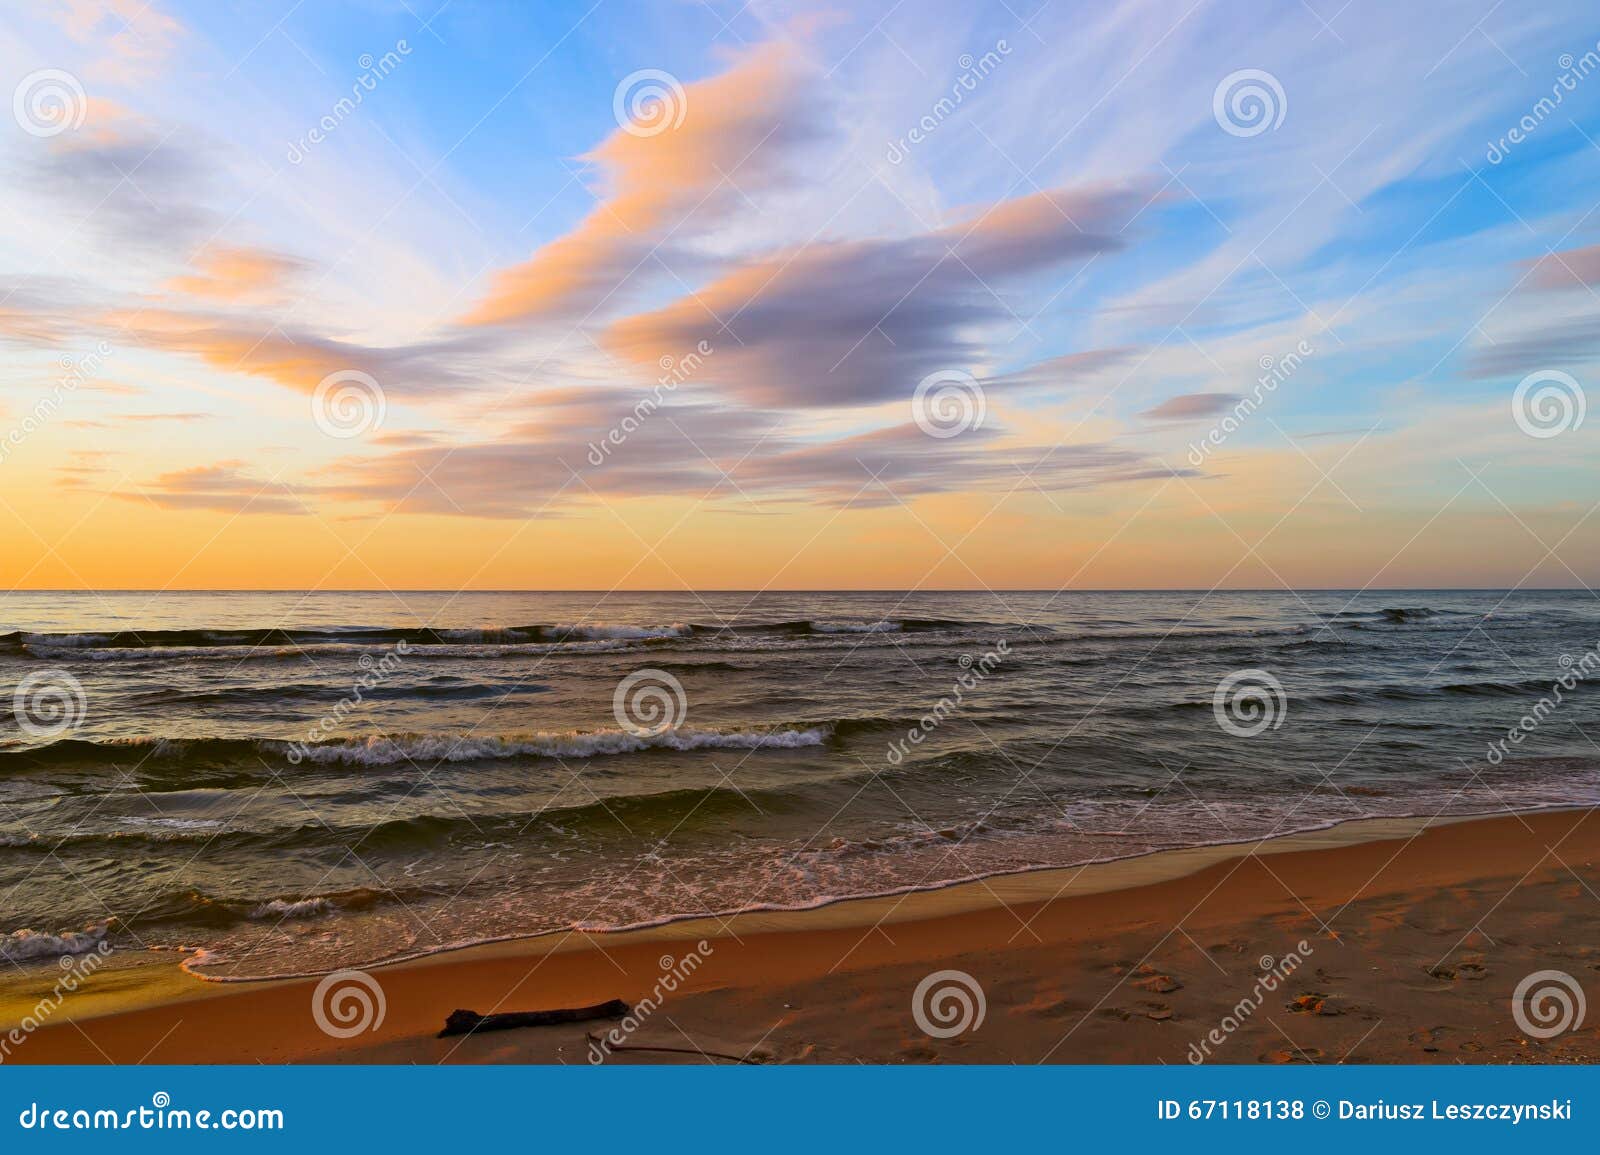 stunning stratus cloud formations at sunset over the baltic sea.